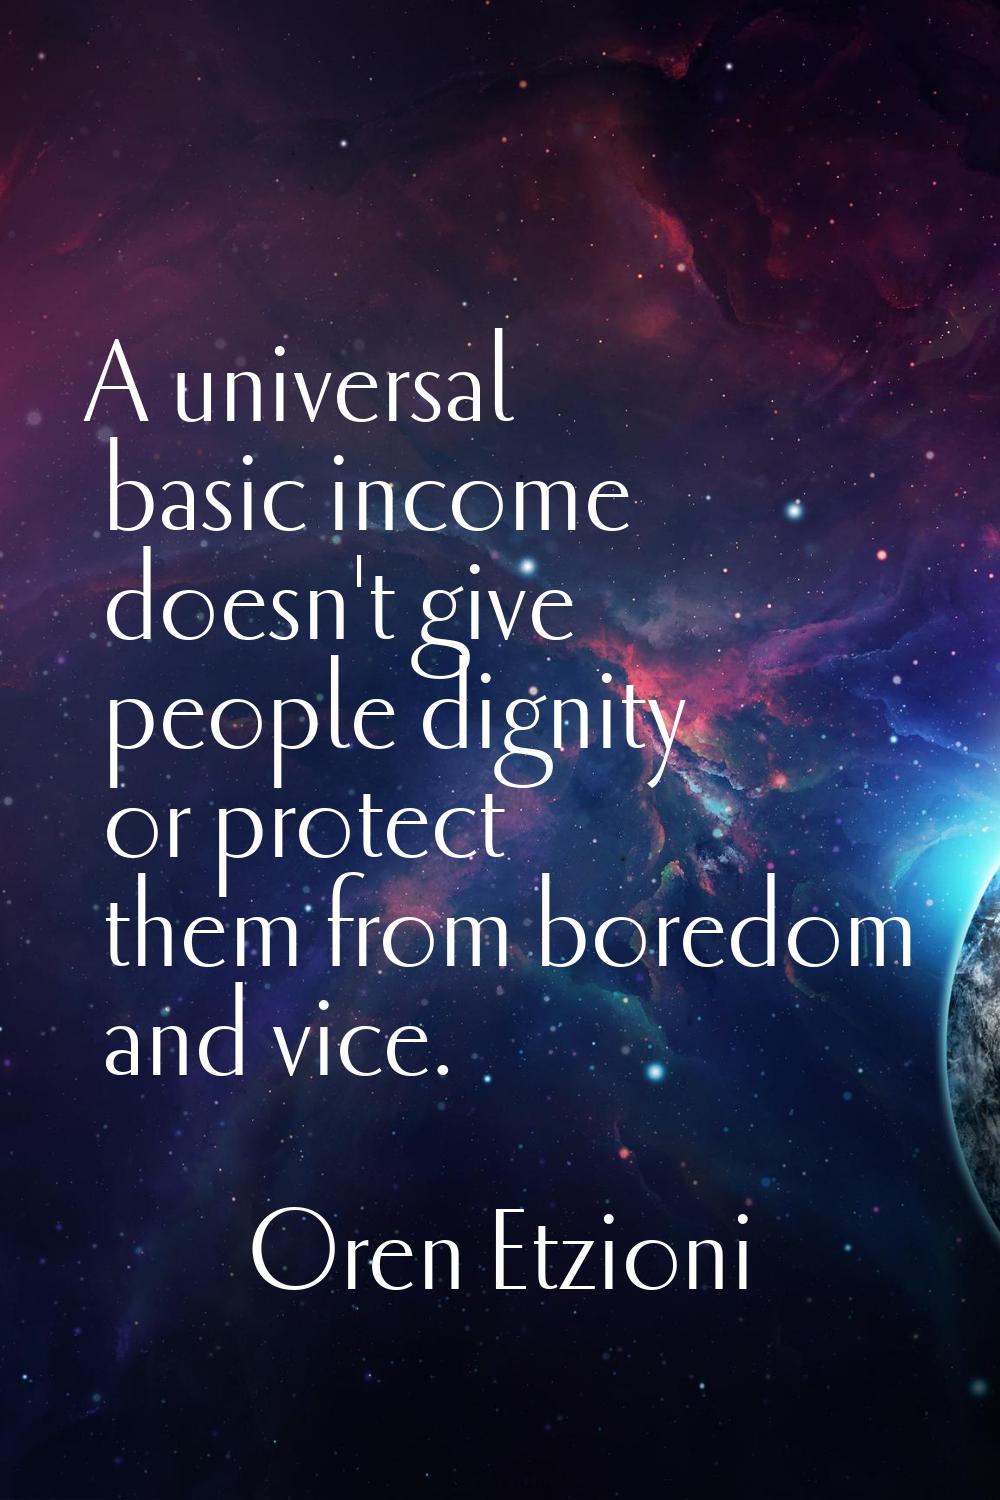 A universal basic income doesn't give people dignity or protect them from boredom and vice.